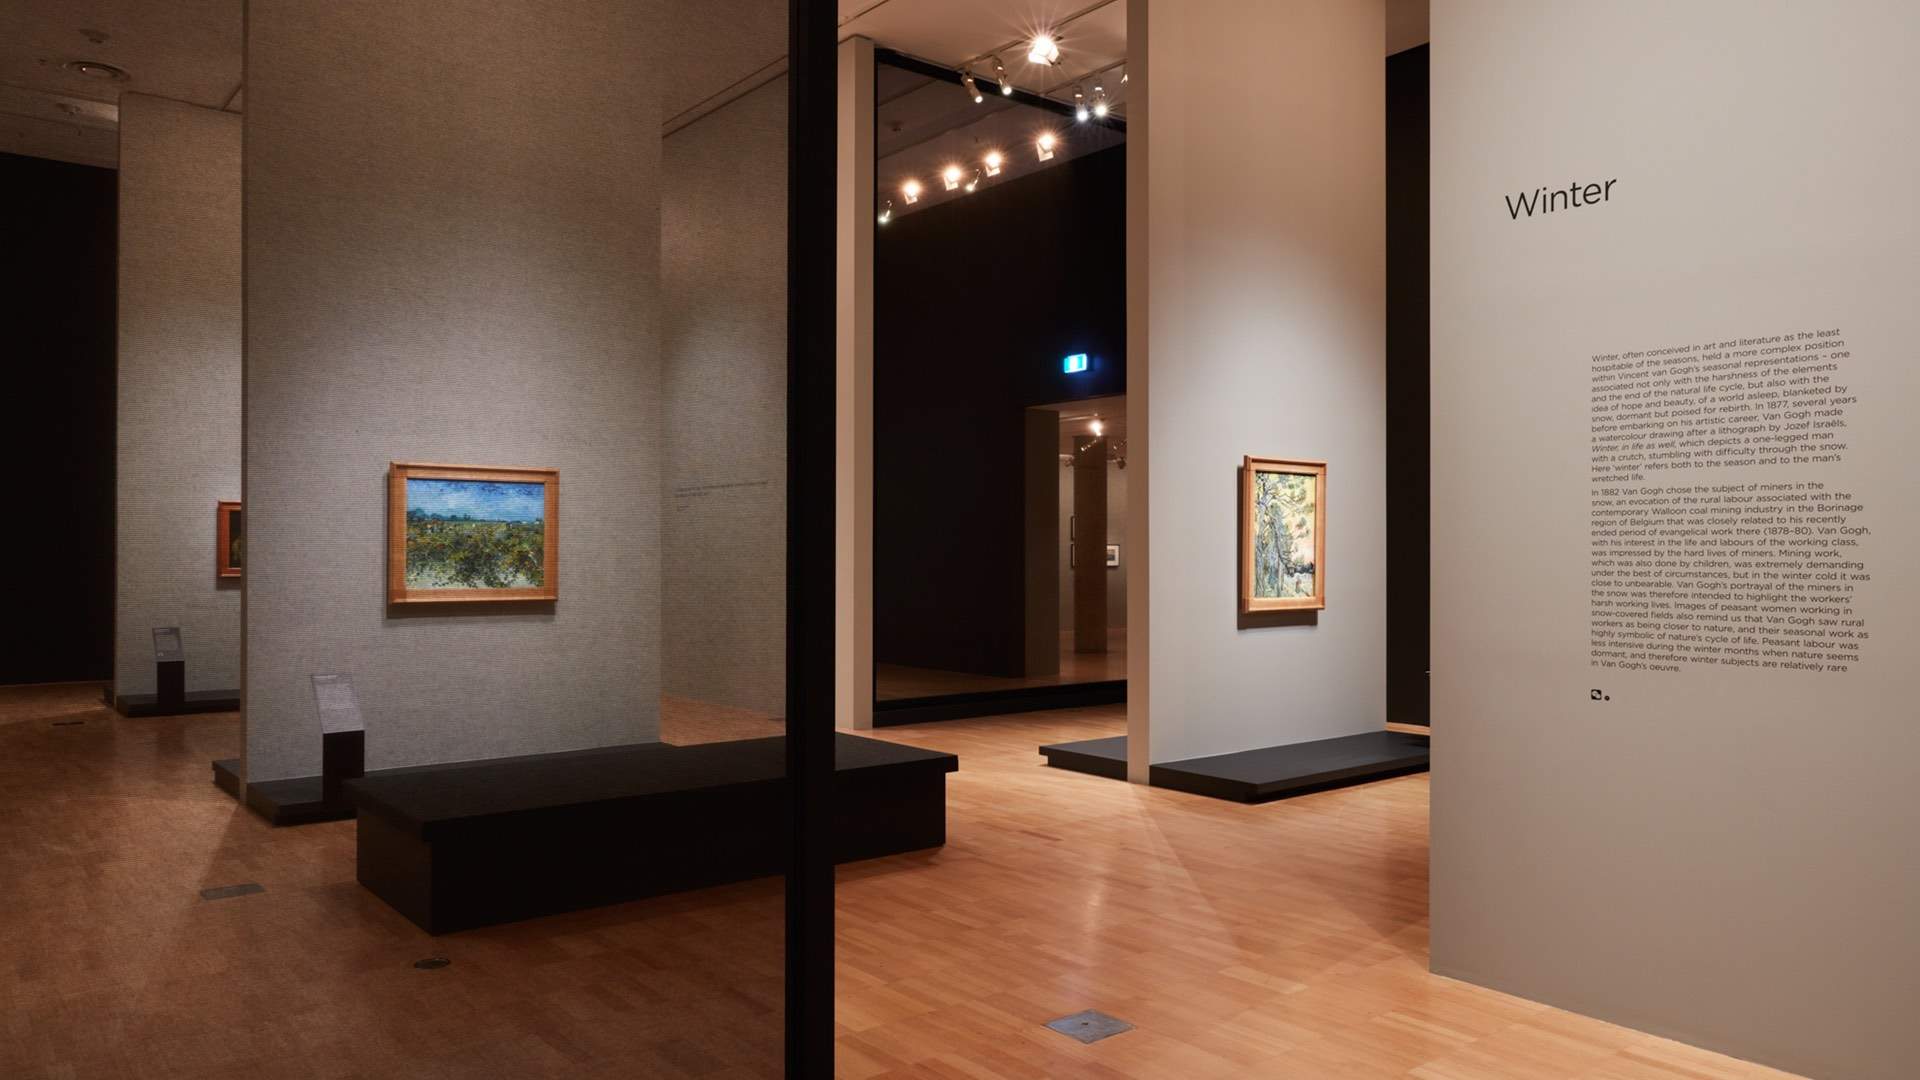 A Look Inside the NGV's Blockbuster Van Gogh Exhibition